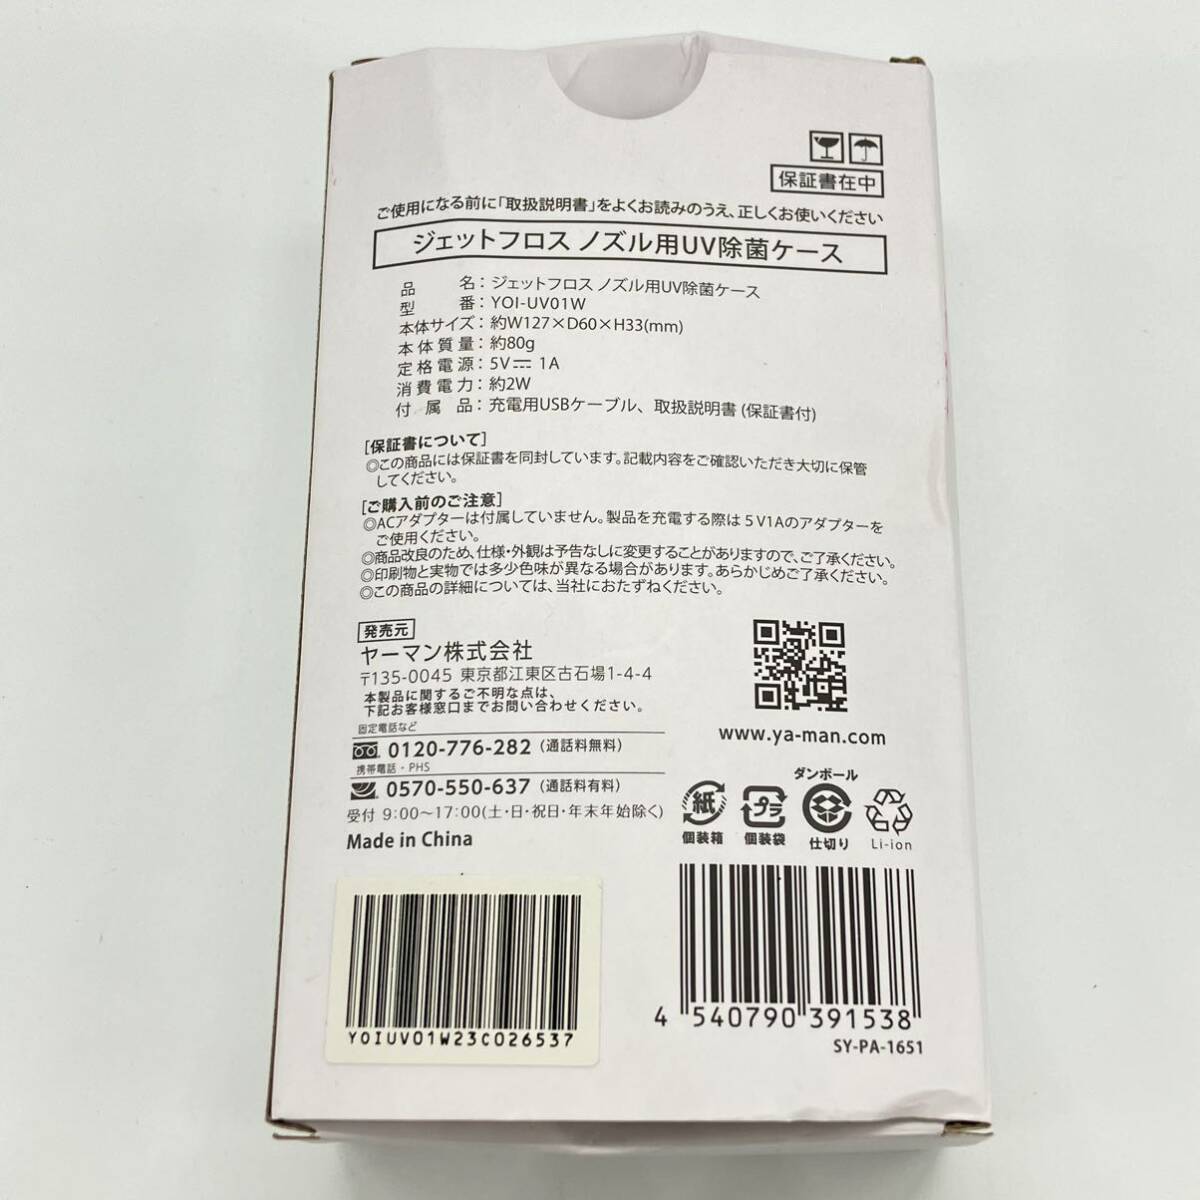 1 jpy ~ 4* [ unopened ]YAMAN jet f Roth compact YOI-100W nozzle for UV bacteria elimination case YOI-UV01W( breaking the seal goods ) Ya-Man white together 